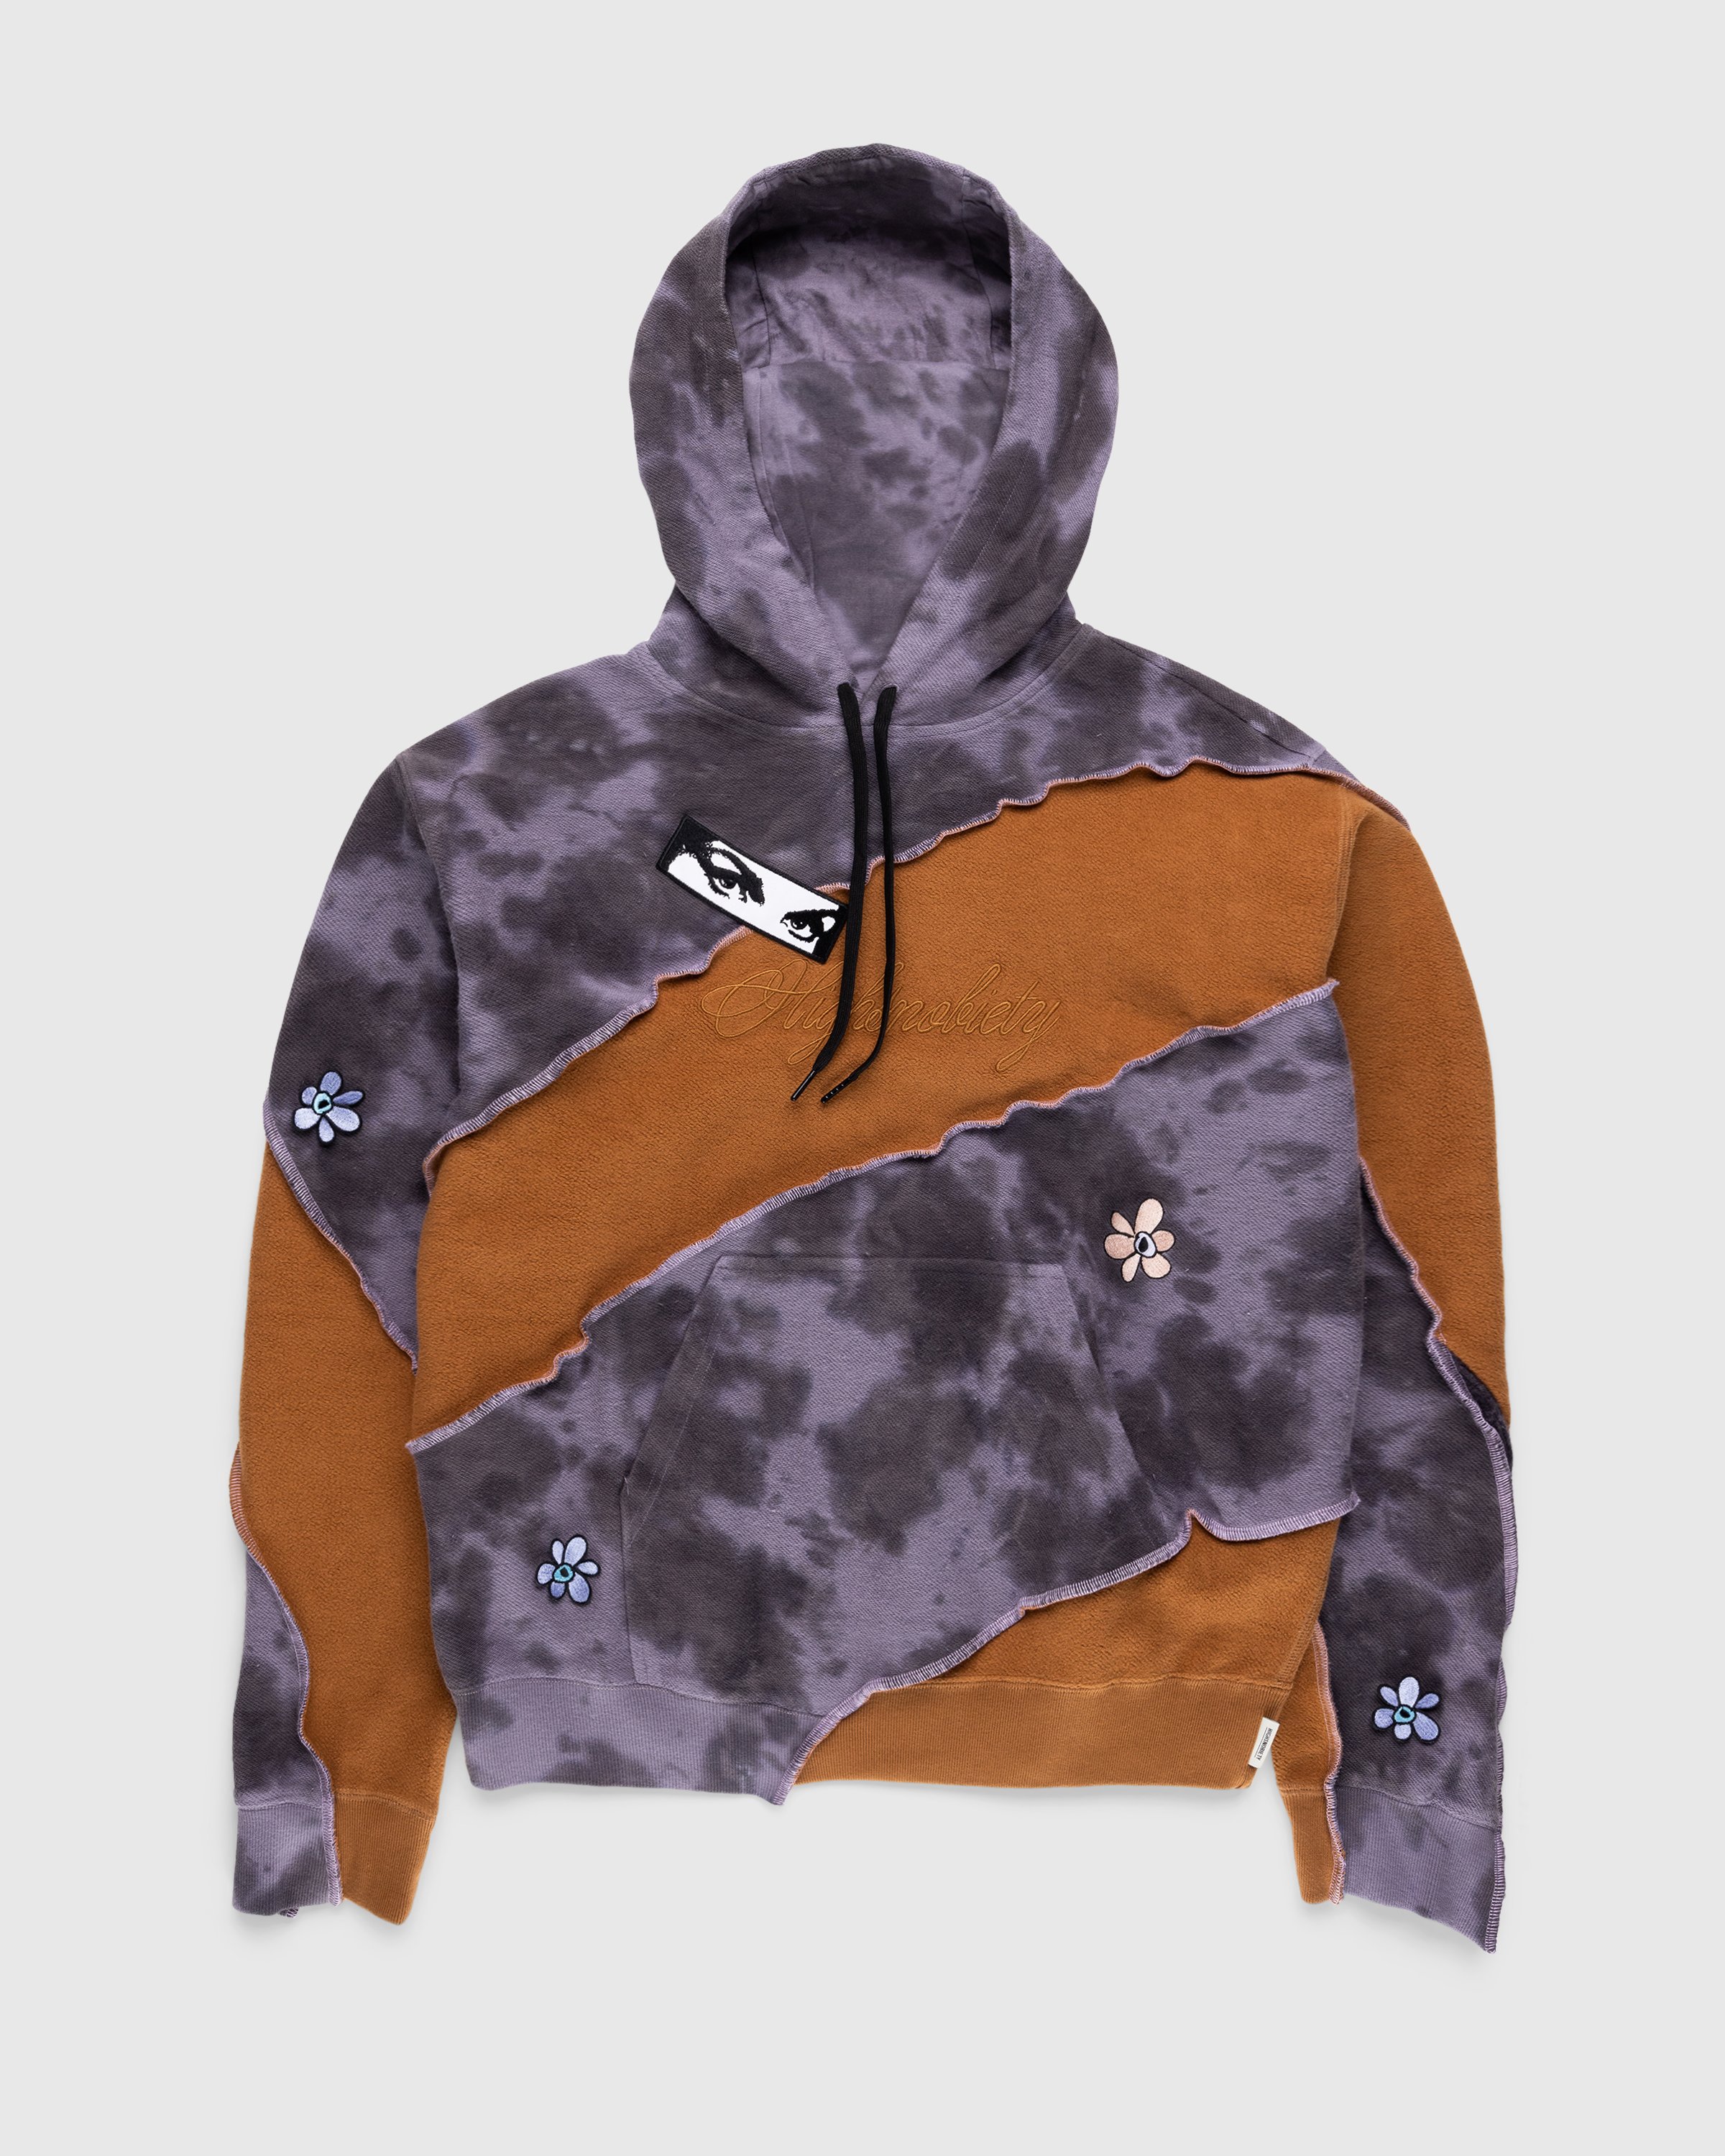 P.A.M. x Highsnobiety - Spiral Upcycle Hooded Sweat Brown/Grey - Clothing - Multi - Image 1